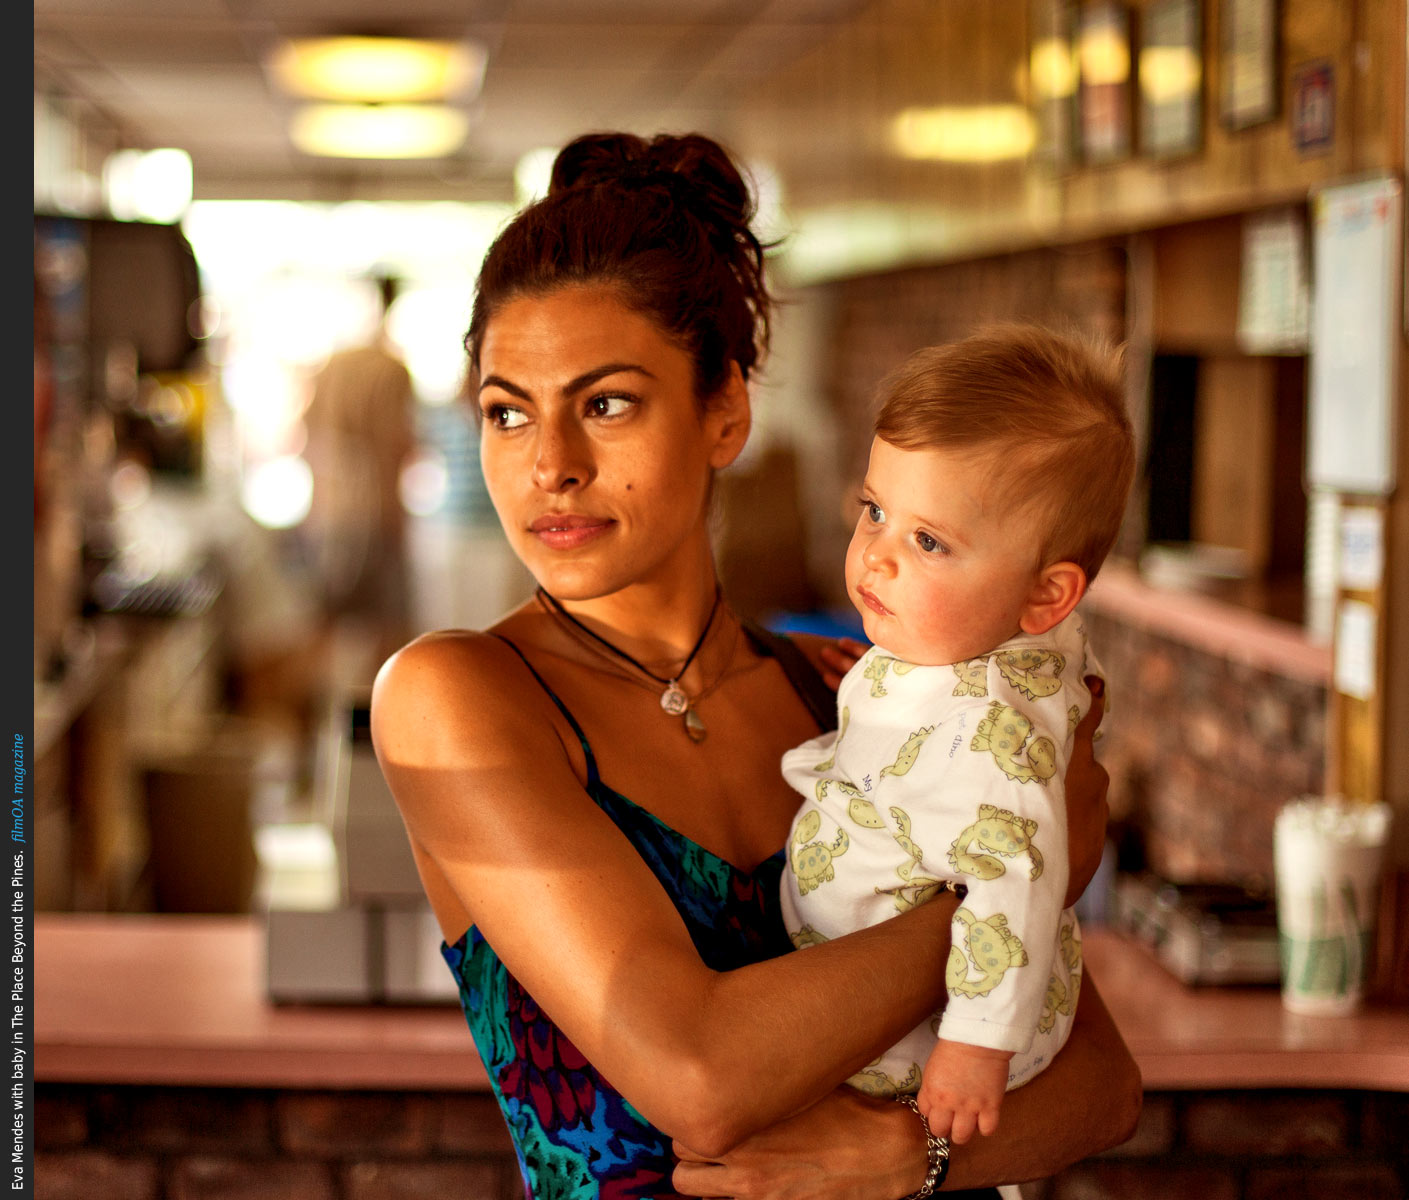 Eva Mendes holding baby in The Place Beyond the Pines